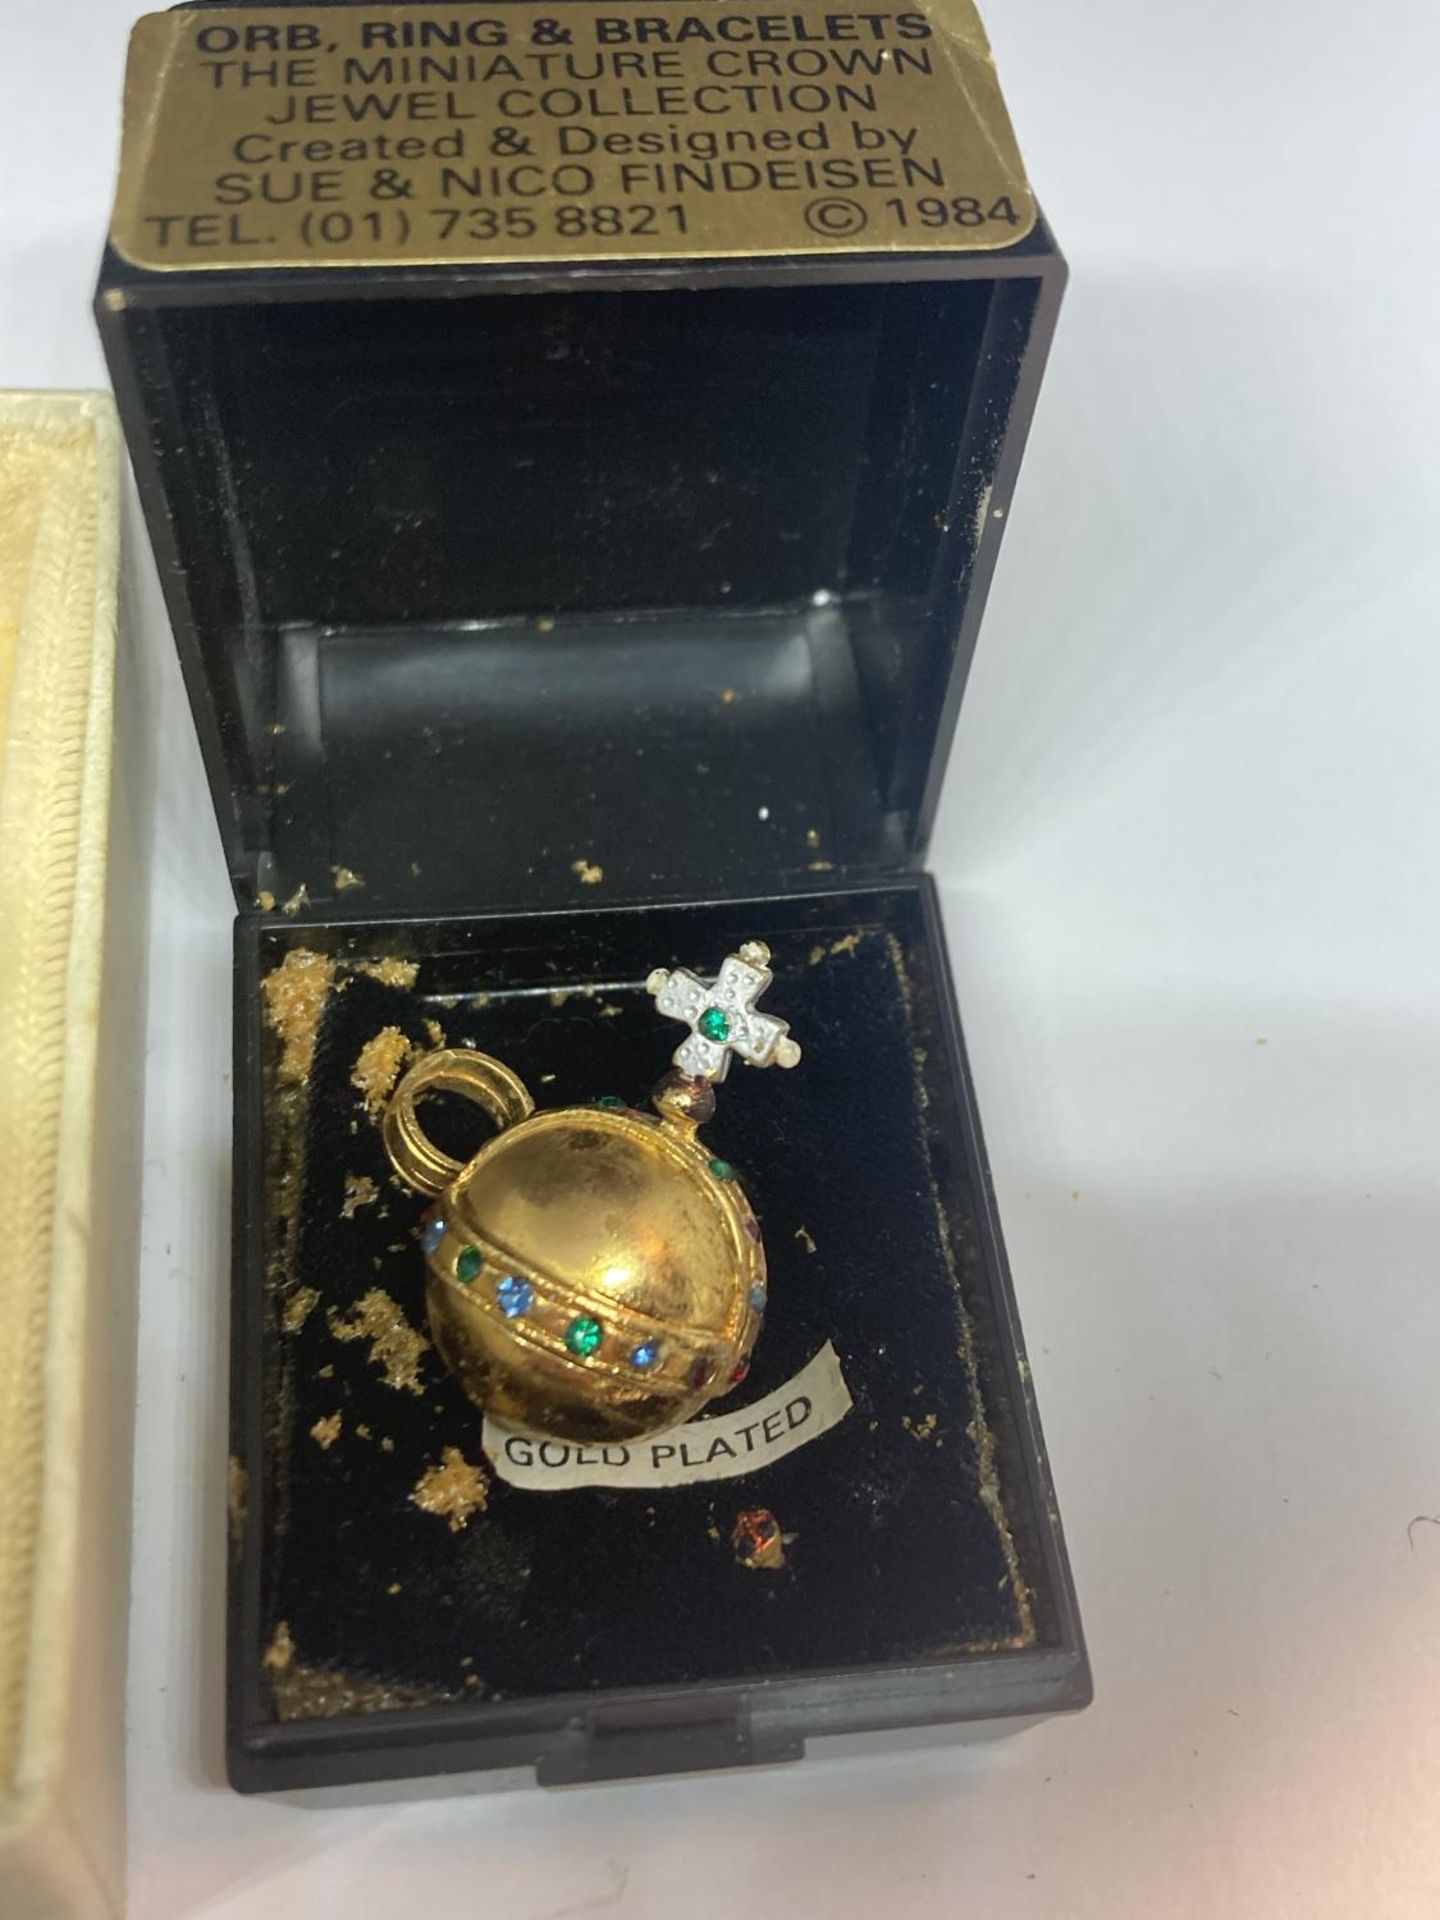 VARIOUS ITEMS TO INCLUDE A GOLD PLATED POCKET WATCH WITH CHAIN, A WHITE METAL POSSIBLY SILVER BROOCH - Image 2 of 6